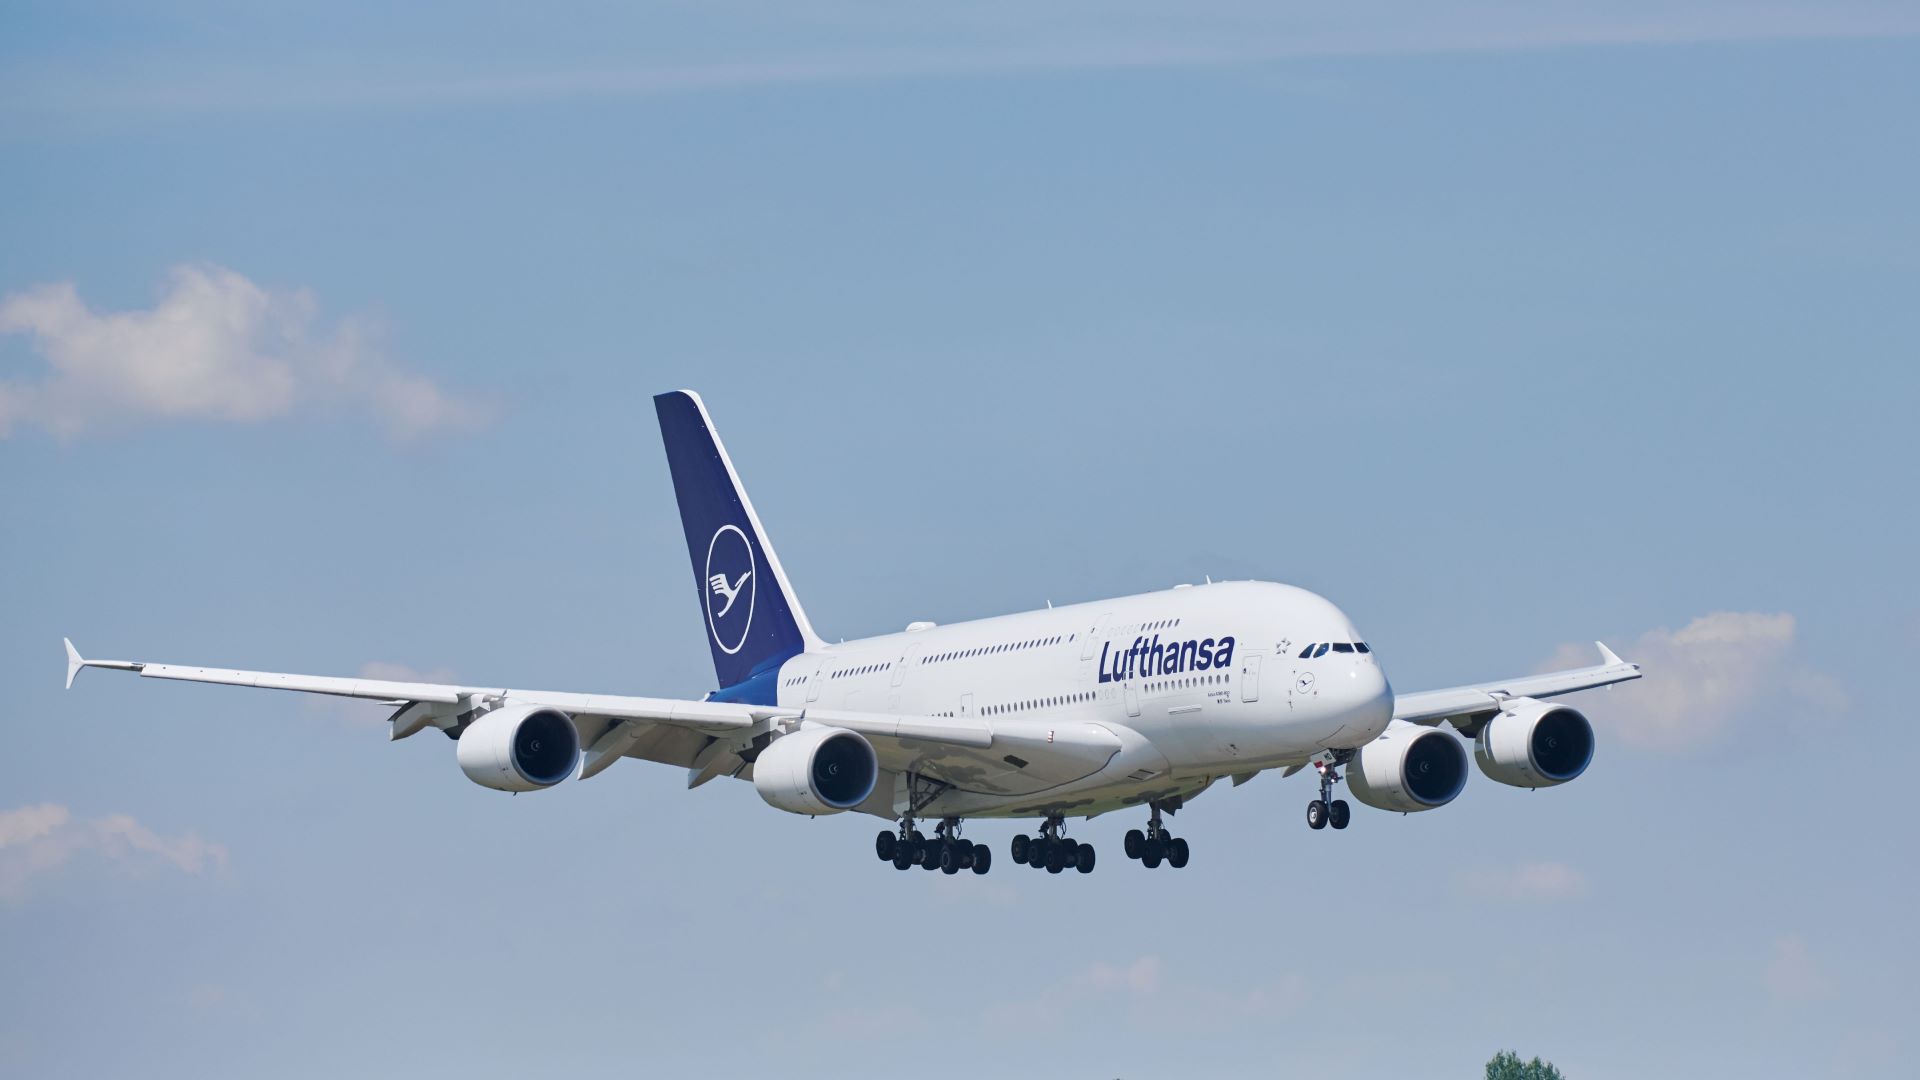 A large white A380 jet with blue tail and Lufthansa logo comes in for landing with wheels down against a blue sky.